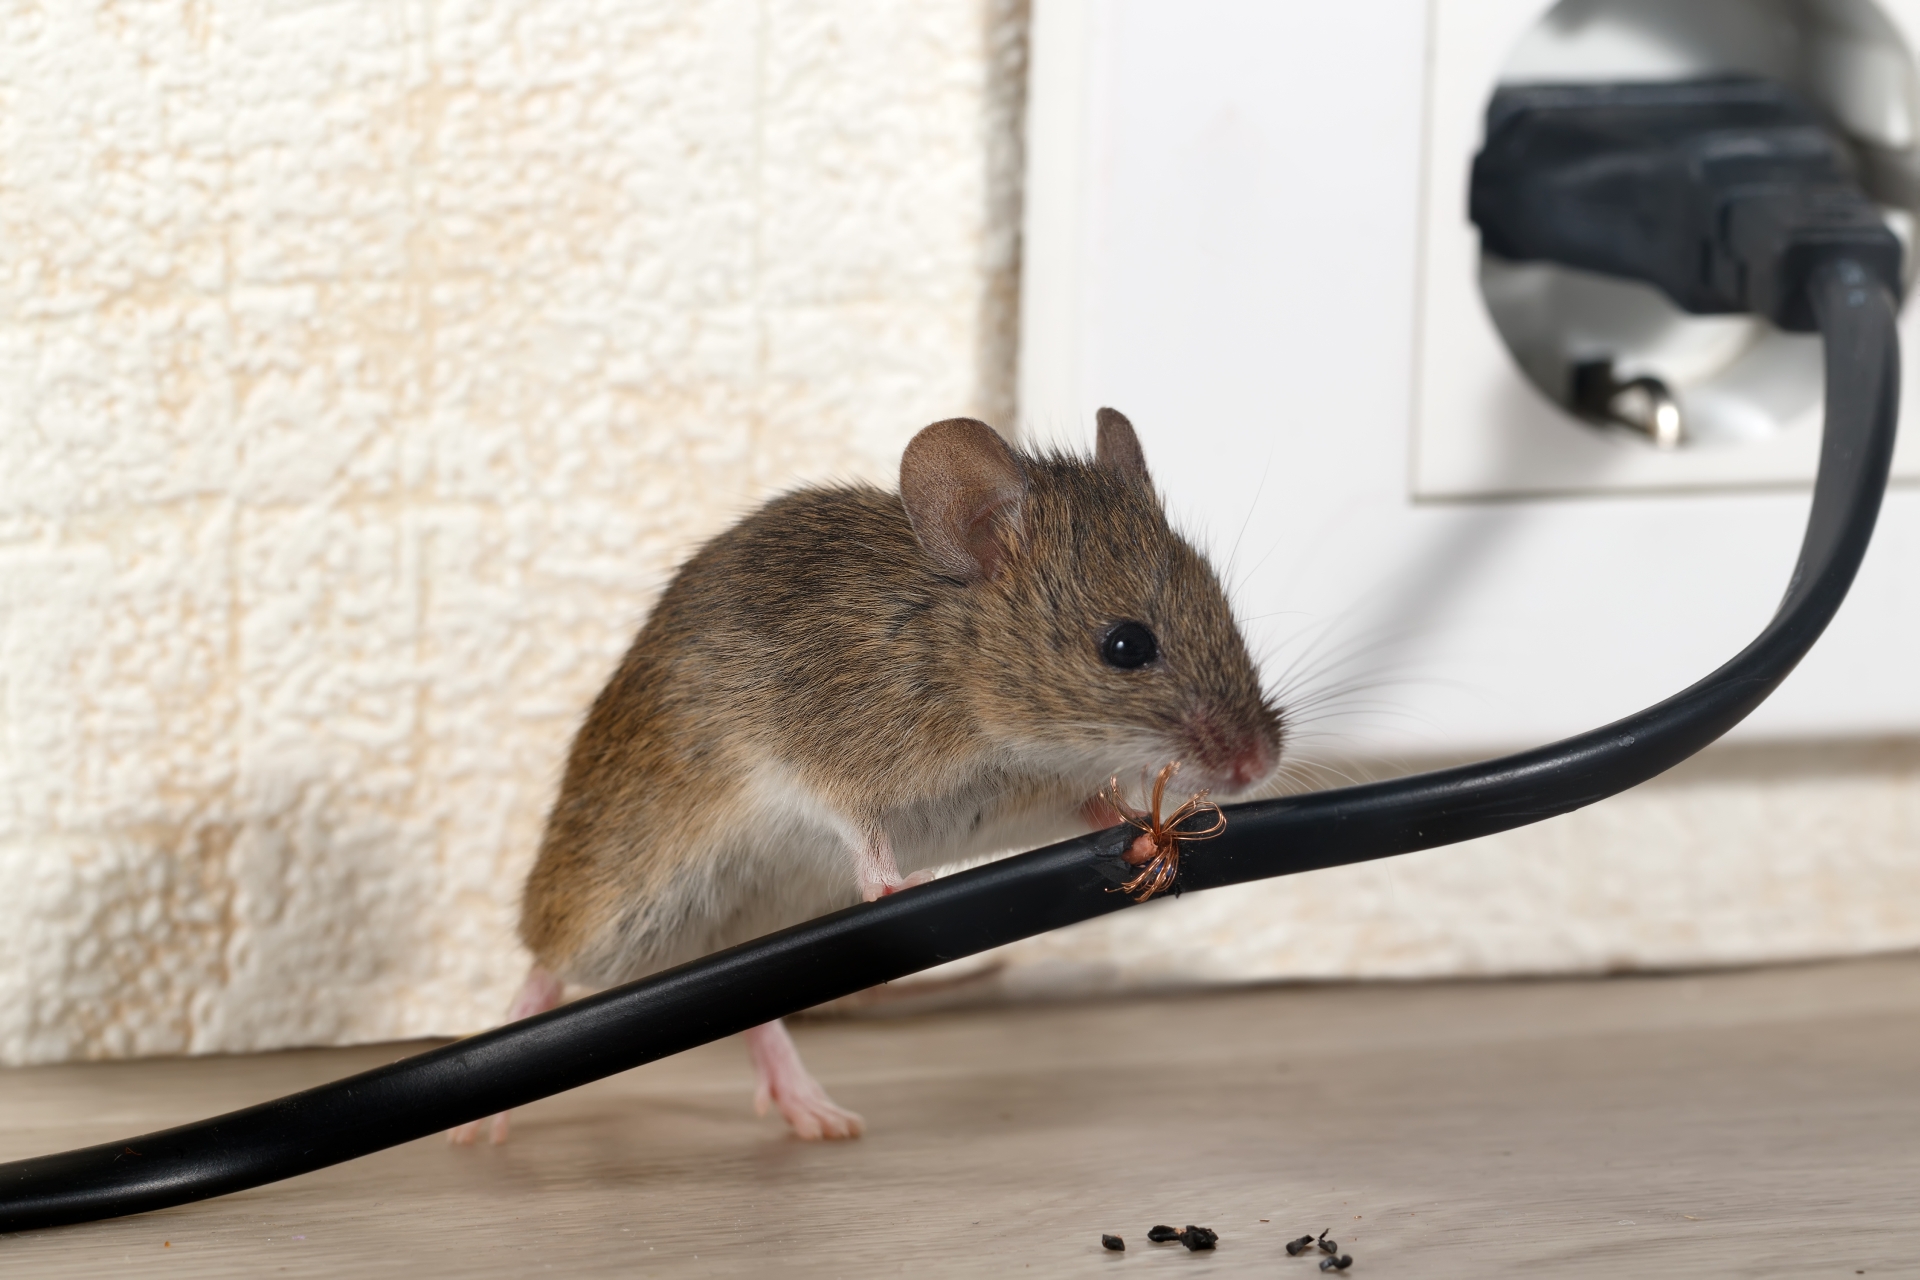 Mice Infestation, Pest Control in Roehampton, SW15. Call Now 020 8166 9746